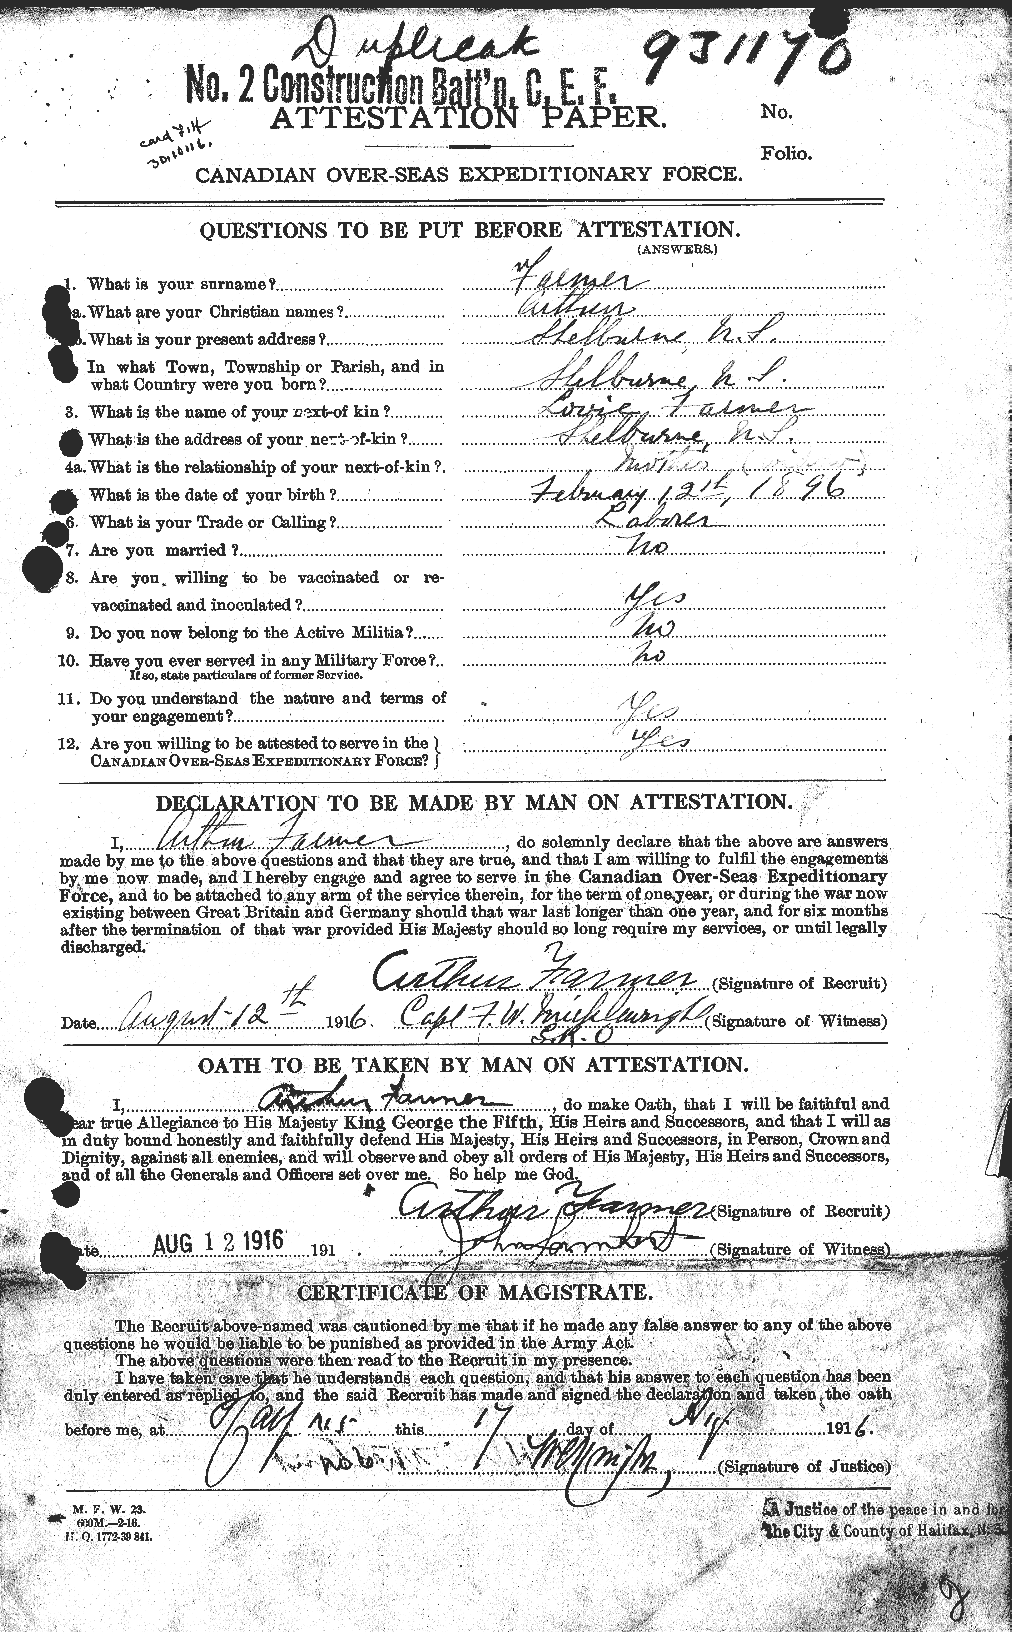 Personnel Records of the First World War - CEF 317934a